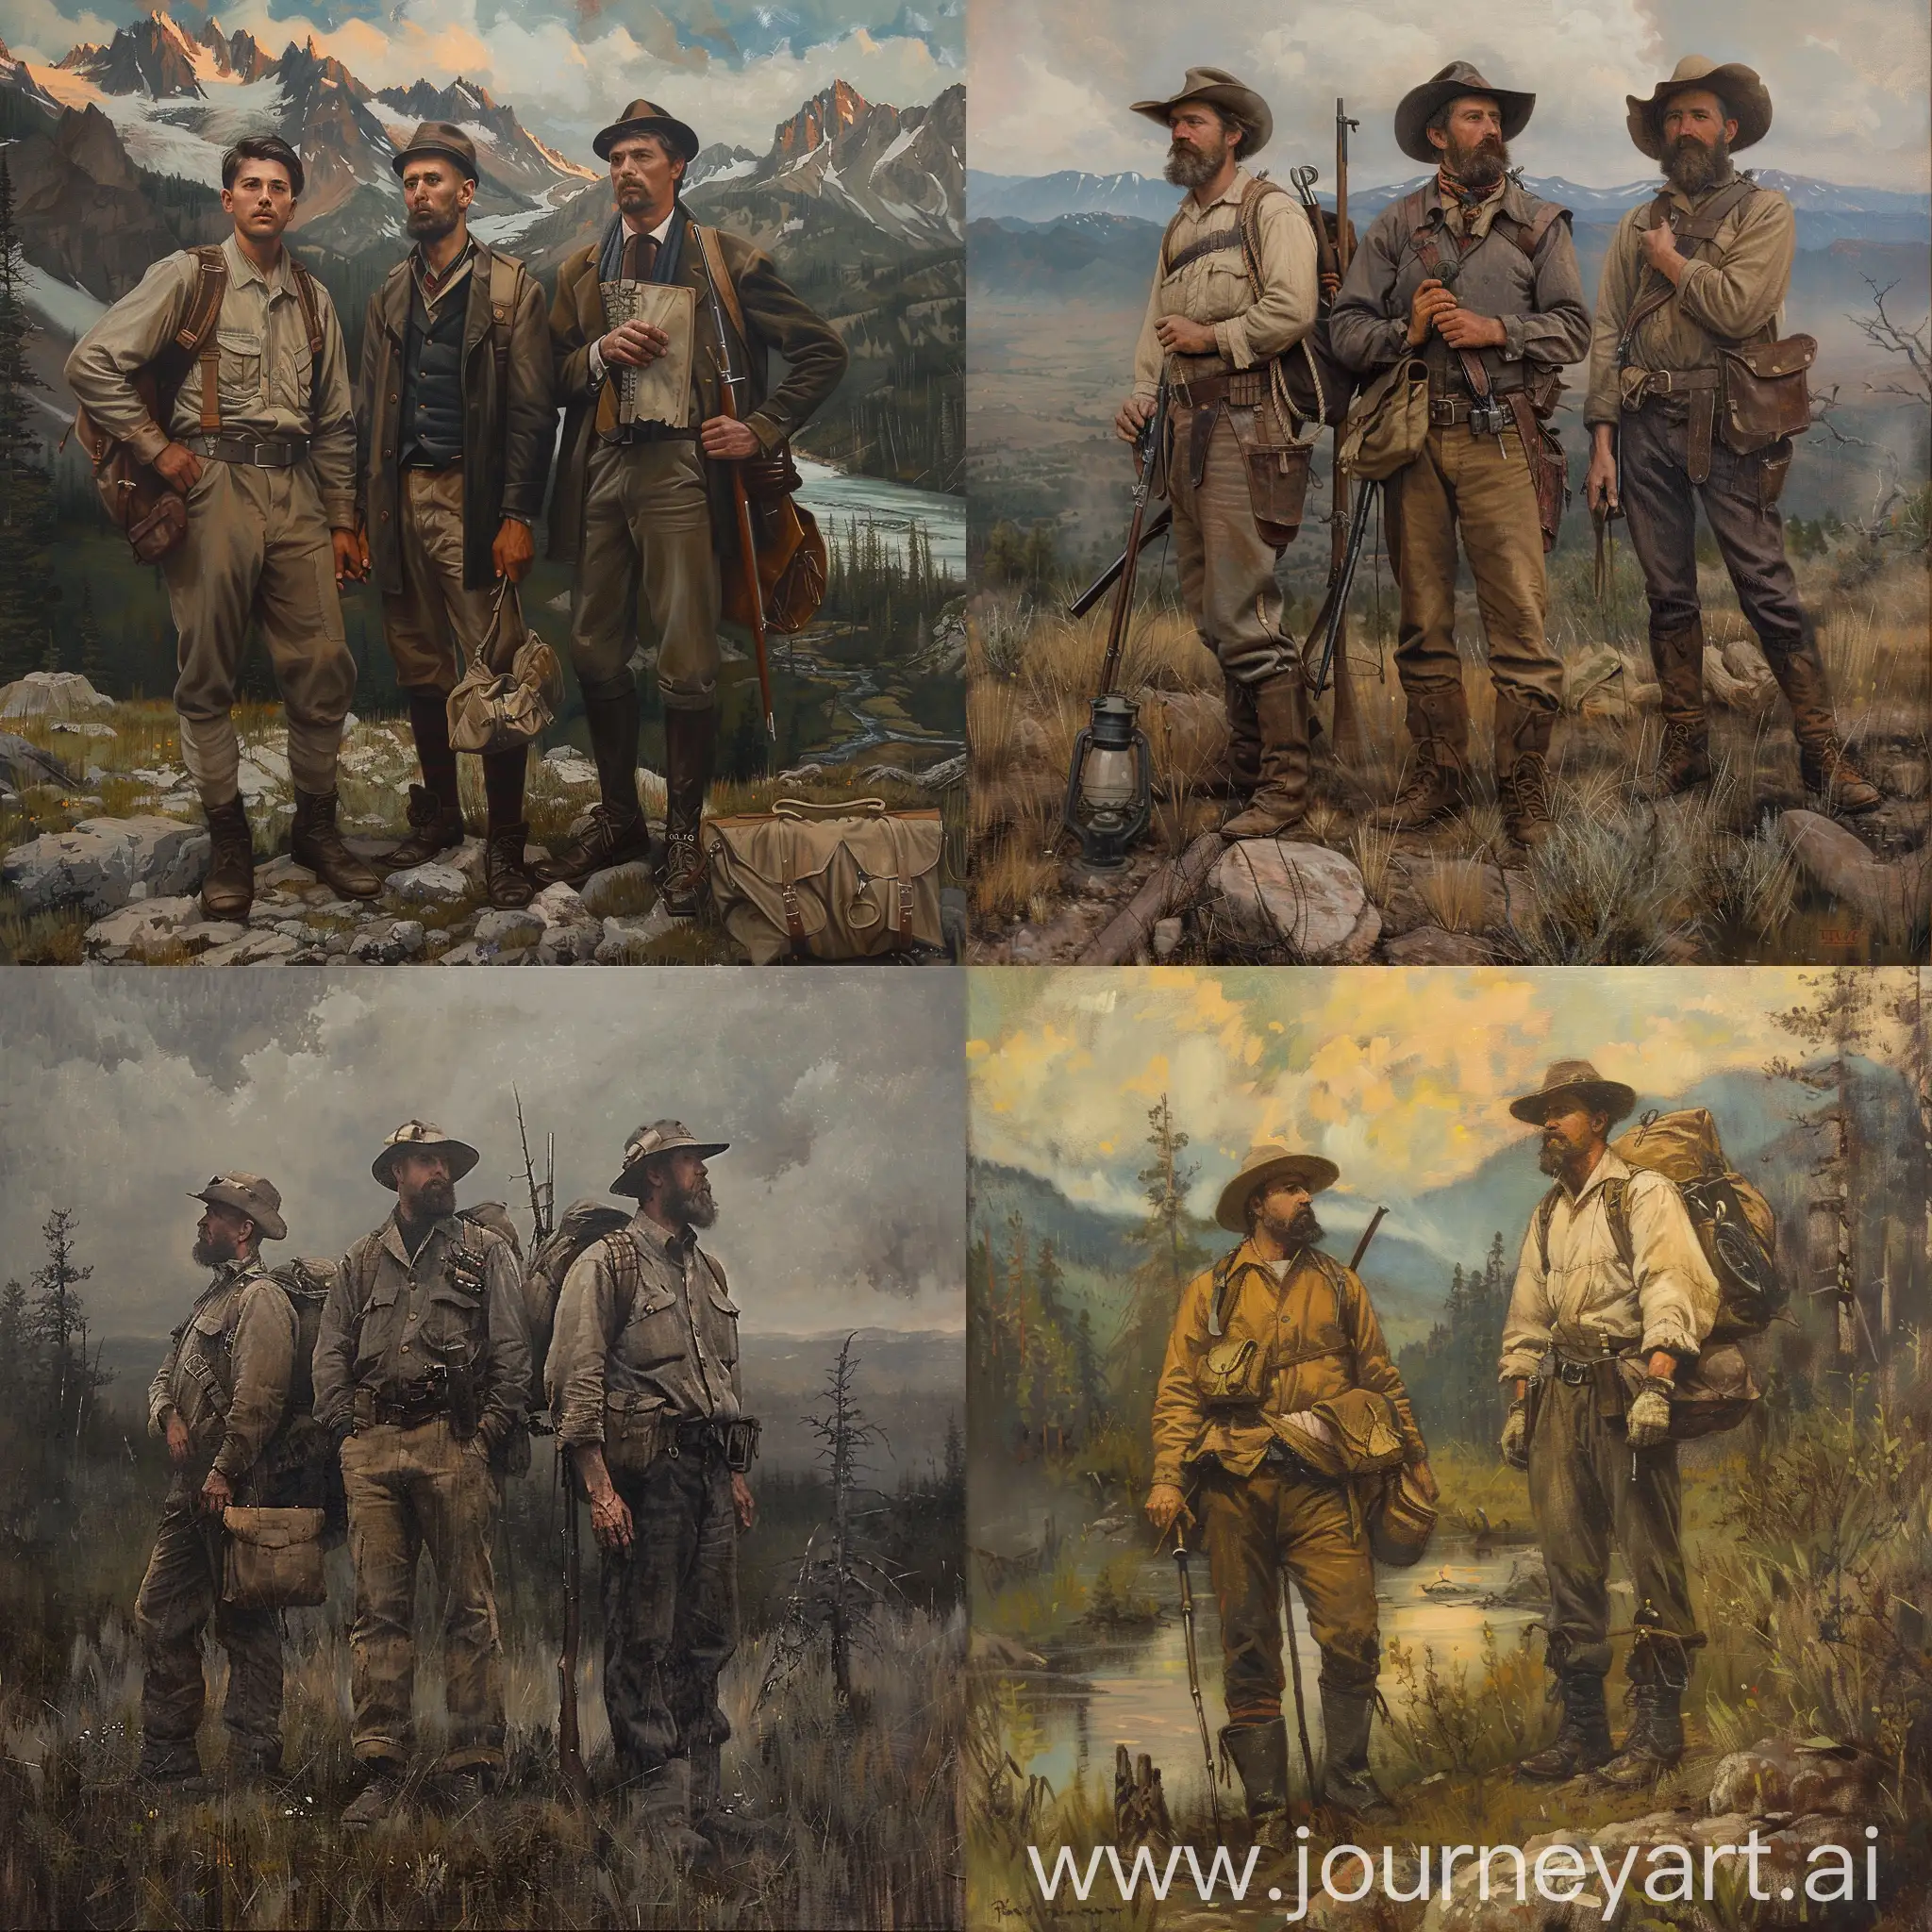 Junius Brutus Stearns-inspired early 20th-century explorers, adventurers in a historical painting, somber atmosphere, muted colors, capturing the essence of discovery, detailed period attire, antique equipment, vast wilderness backdrop, sense of wonder, --sref https://cdn.discordapp.com/attachments/1209105609023164446/1256922615273099275/1.jpg?ex=668287e7&is=66813667&hm=30d6aa959f51d6d941f62236c69962052adef1c9dbdabce9167d1d58e2015543& --sw 50 --ar 16:9 --v 6